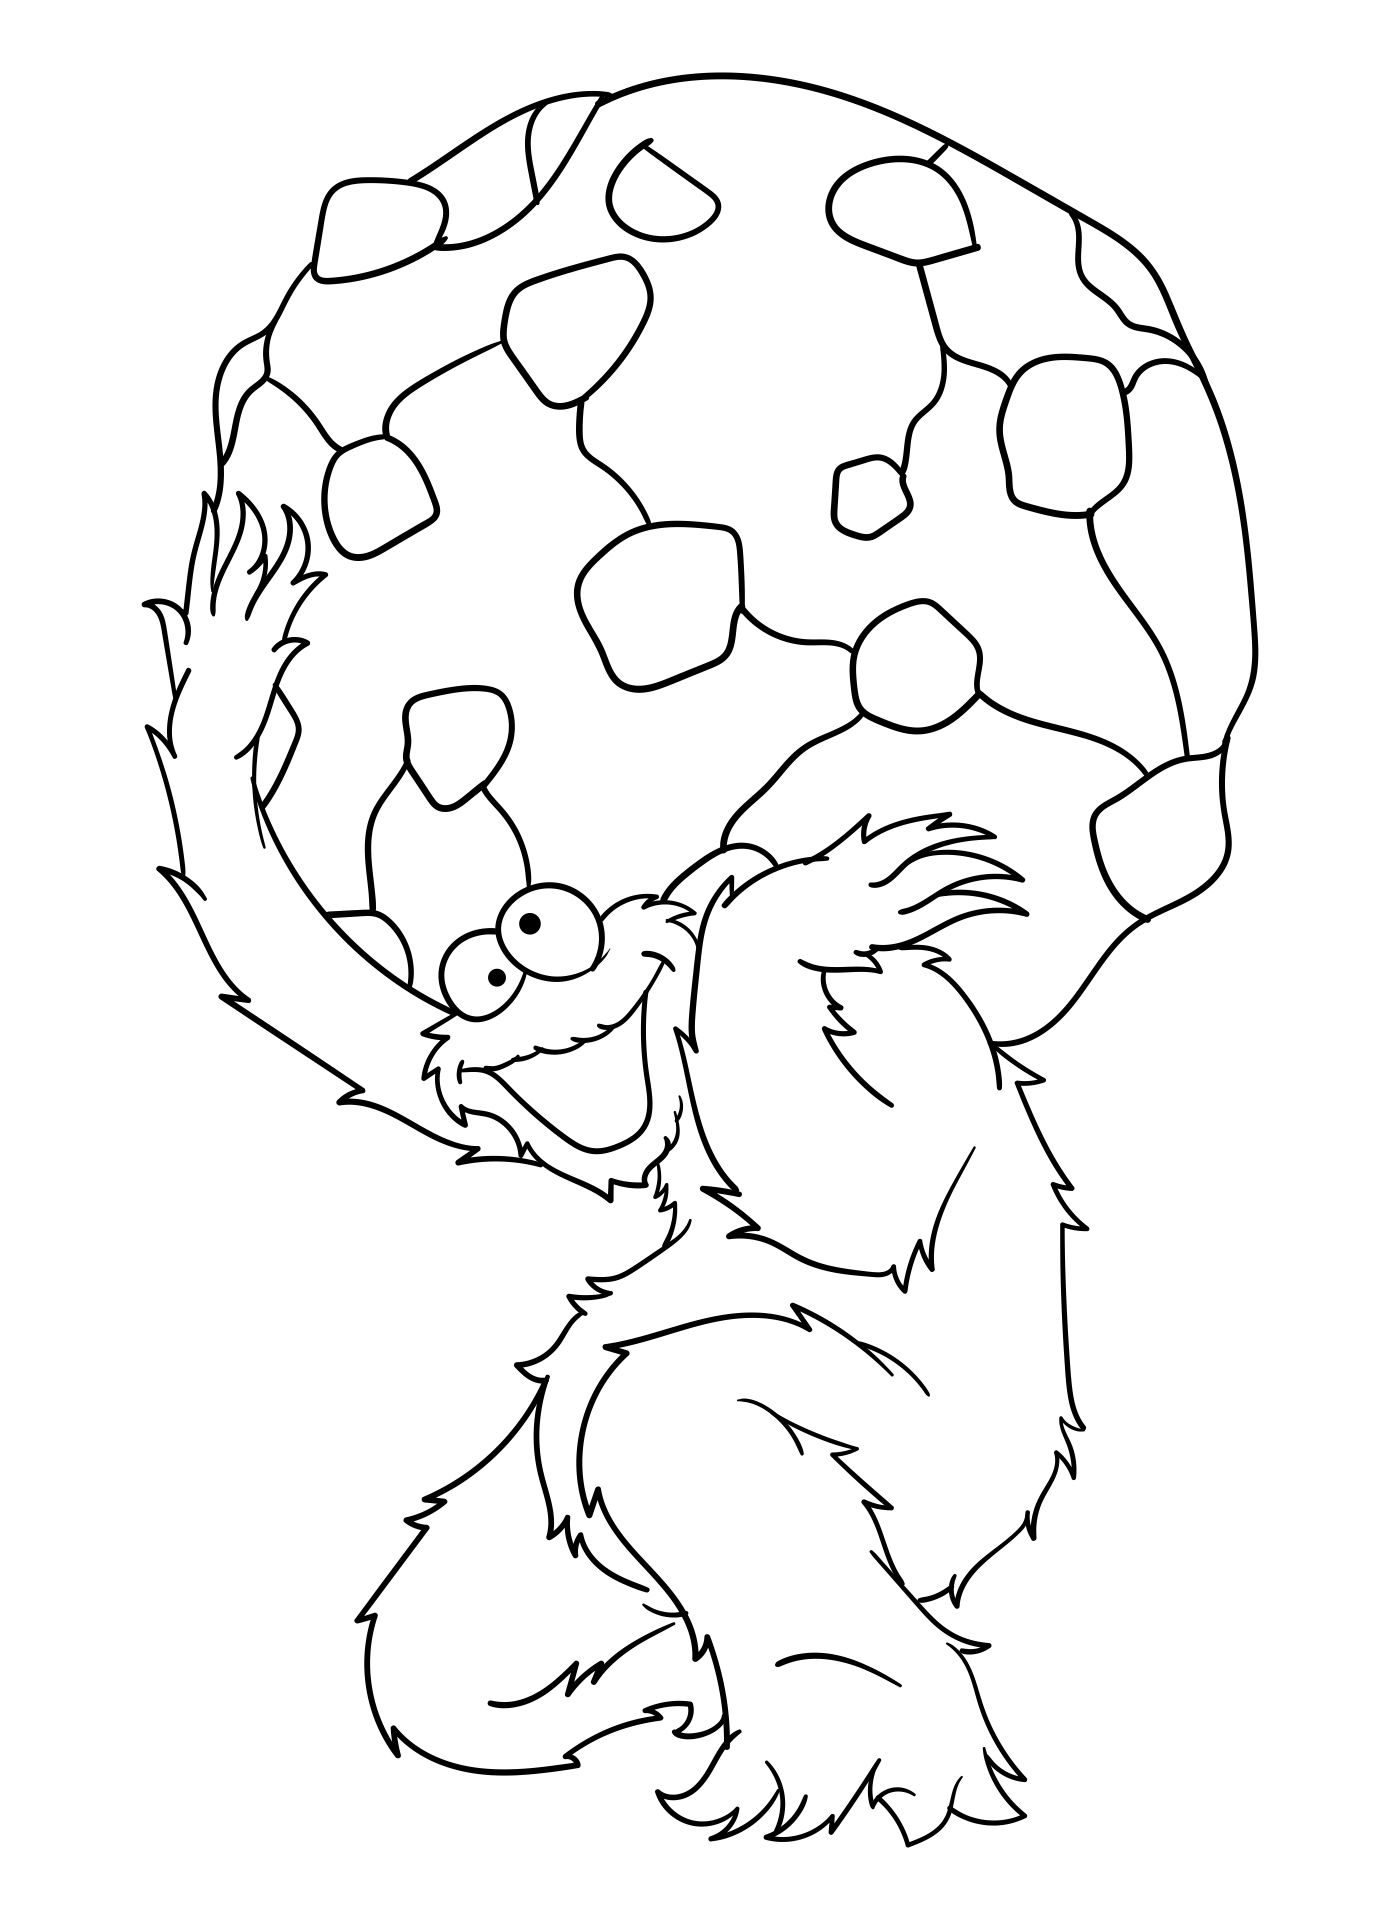 Cookie Monster Coloring Pages